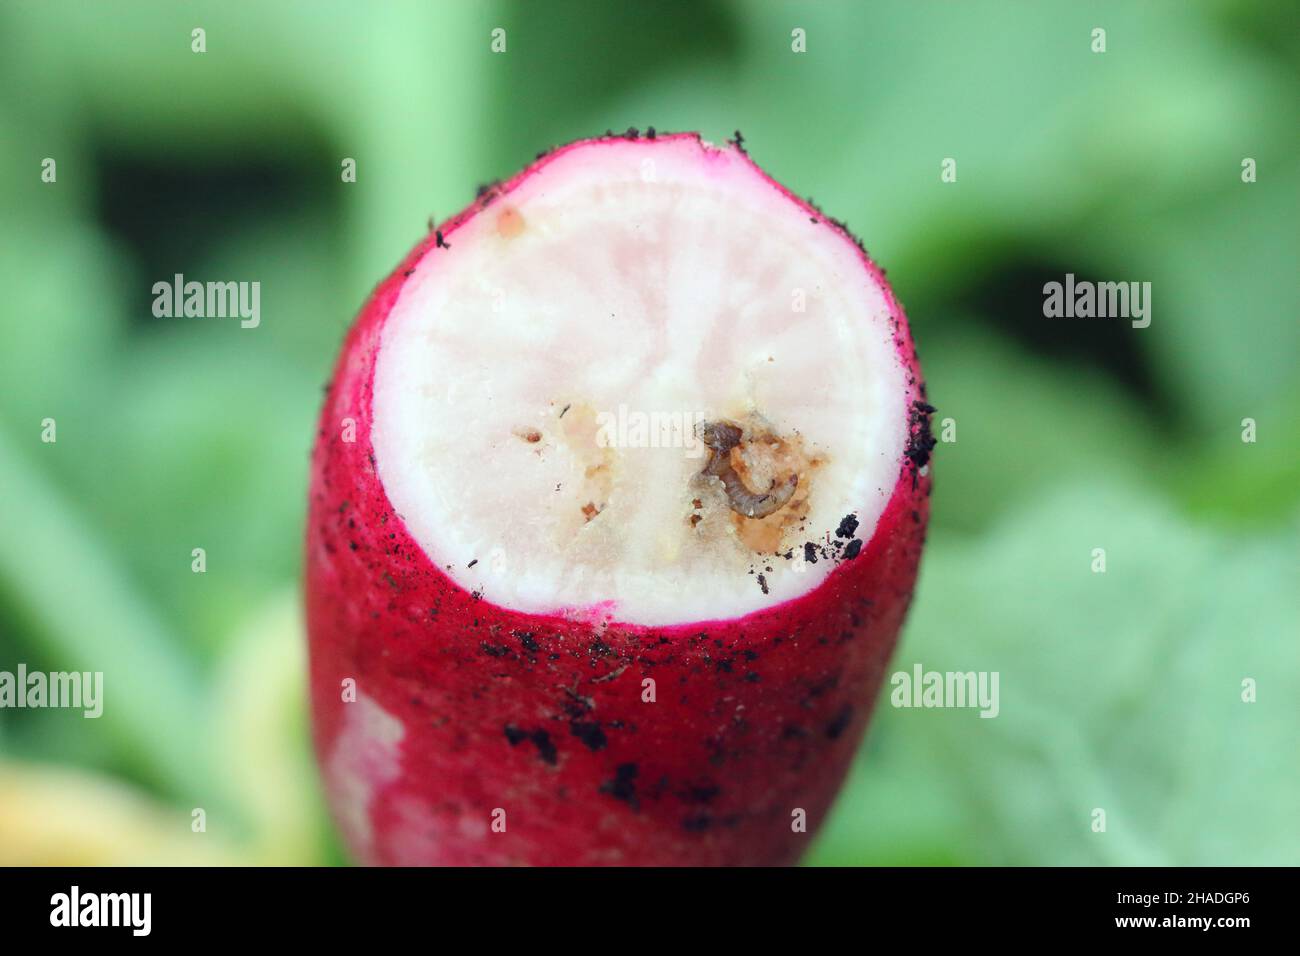 Radish damaged by maggots of Bibionidae called March flies and lovebugs on soil. This insects live in soil and damaged plant roots. Stock Photo